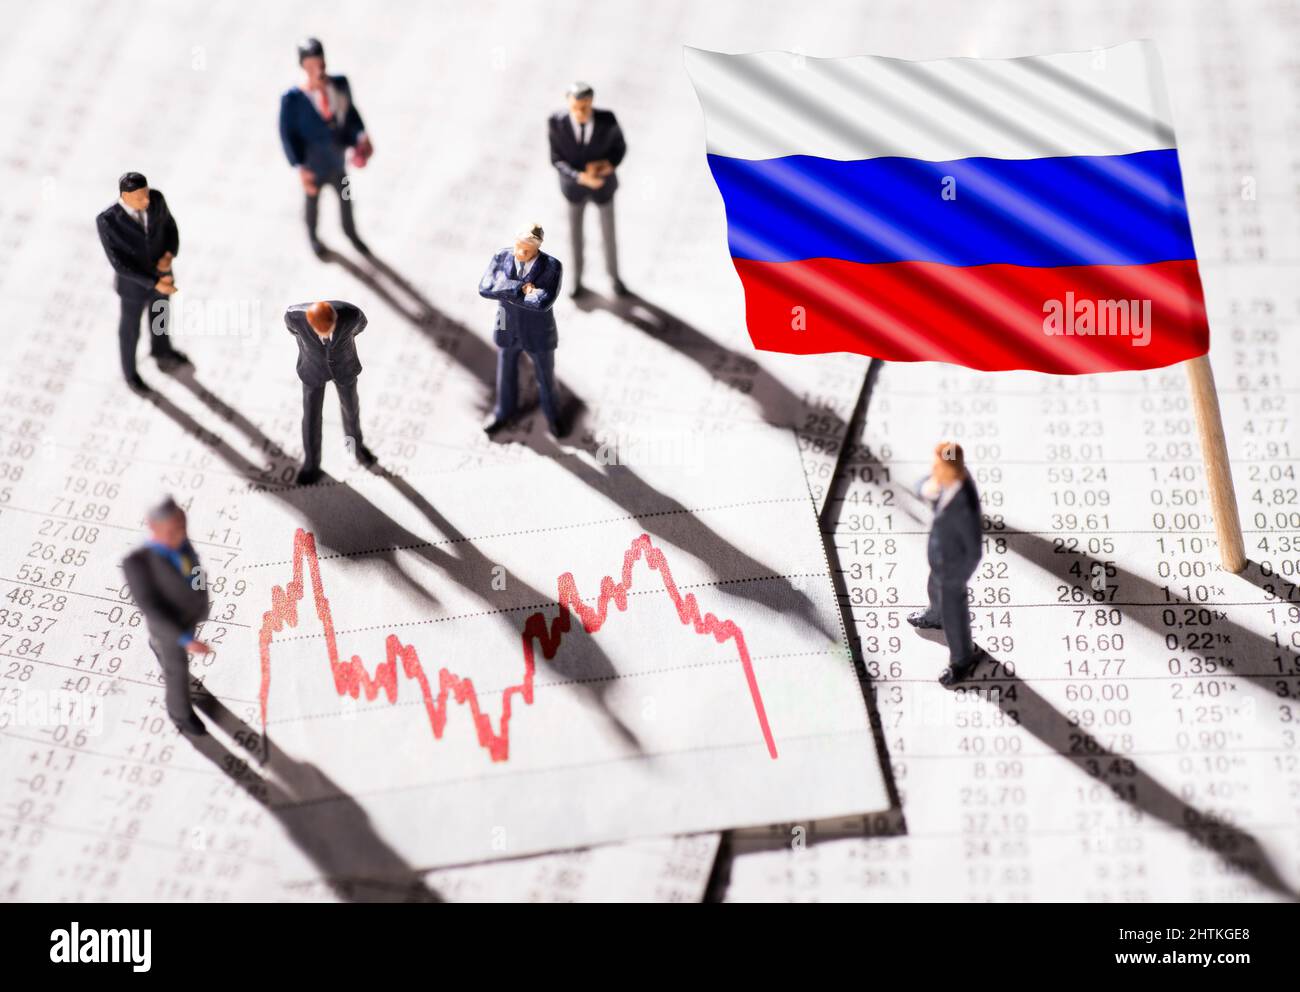 Manager with diagram and the flag of Russia Stock Photo